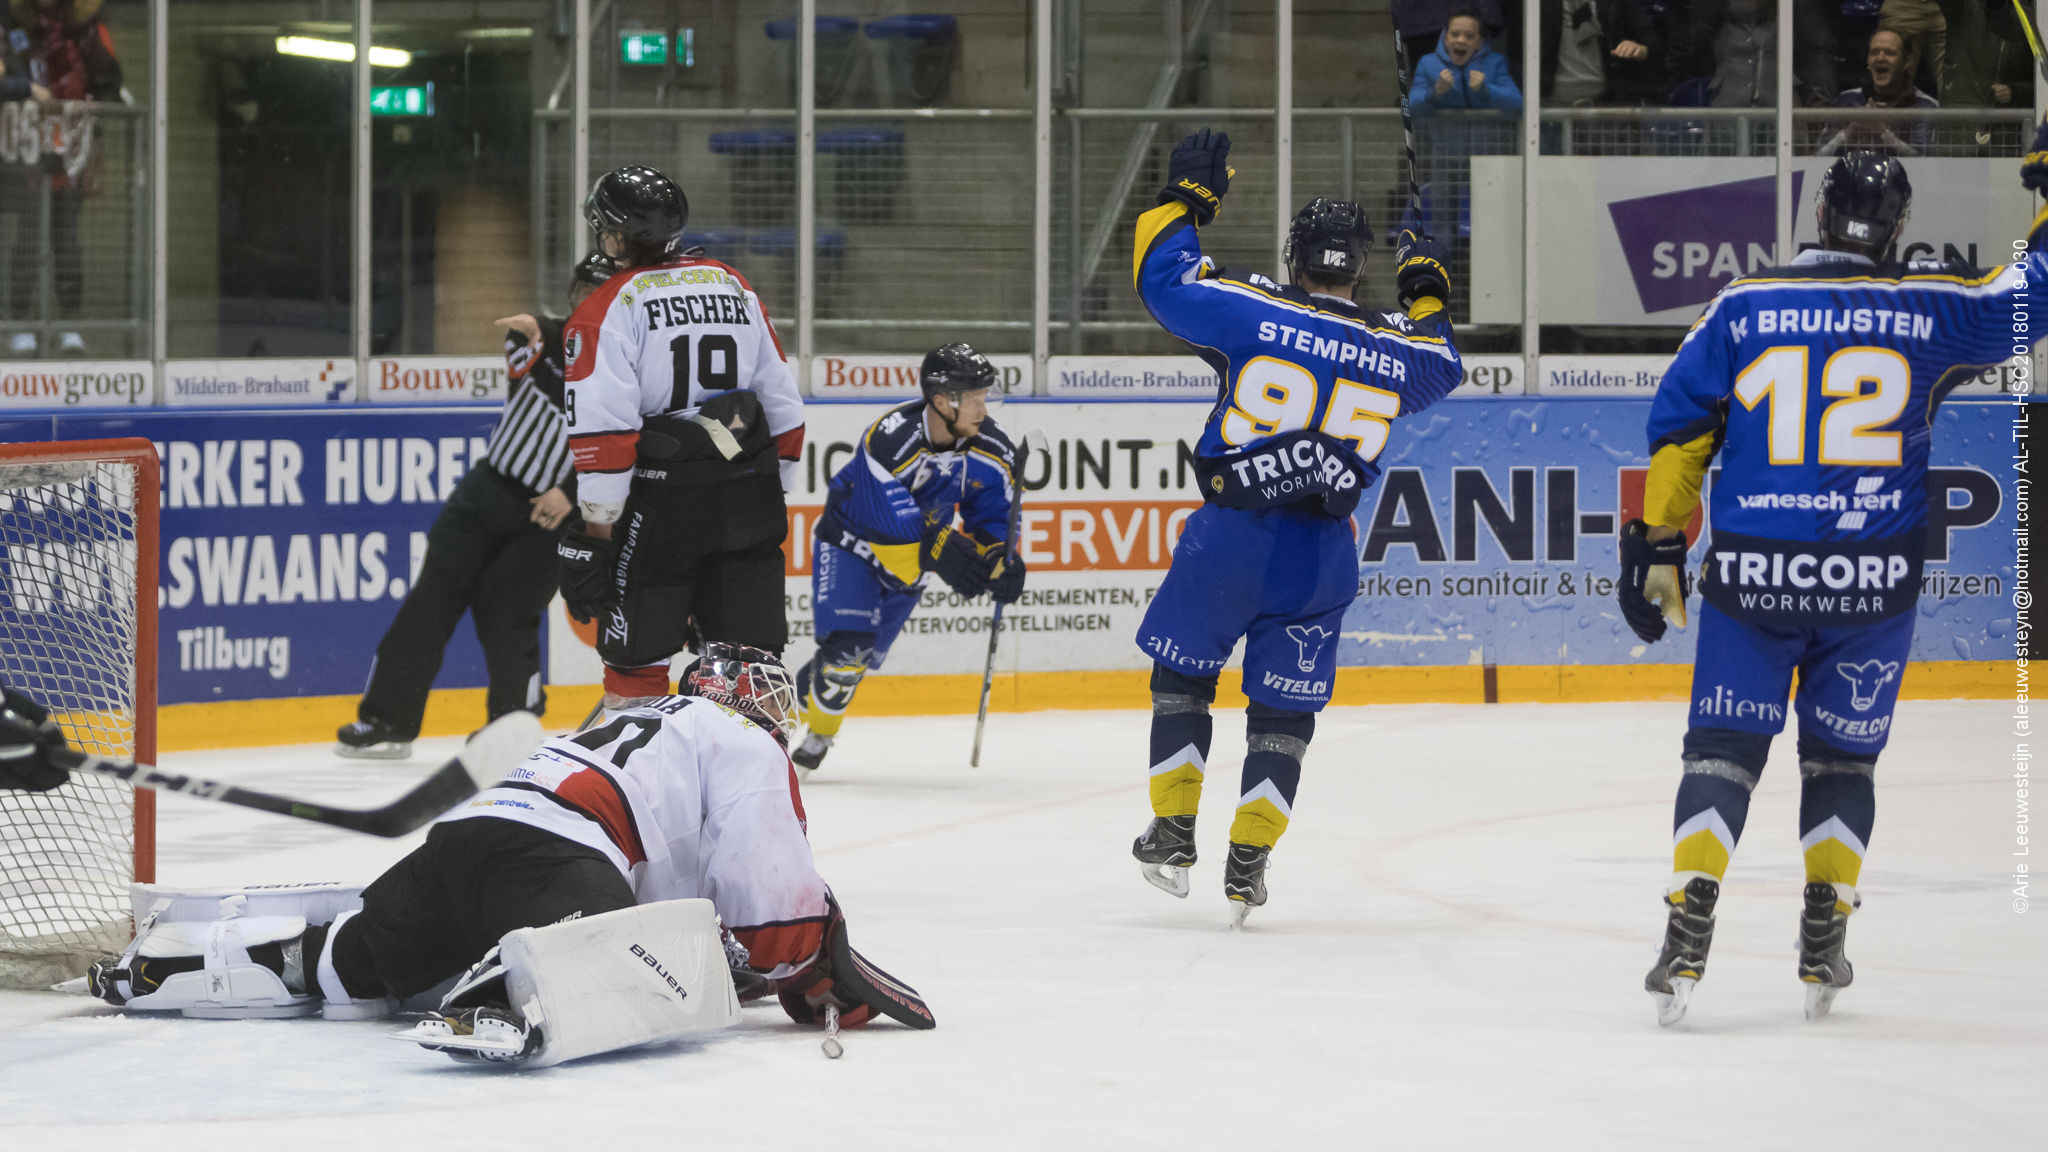 Tilburg Trappers vs. Hannover Scorpions (4-2)